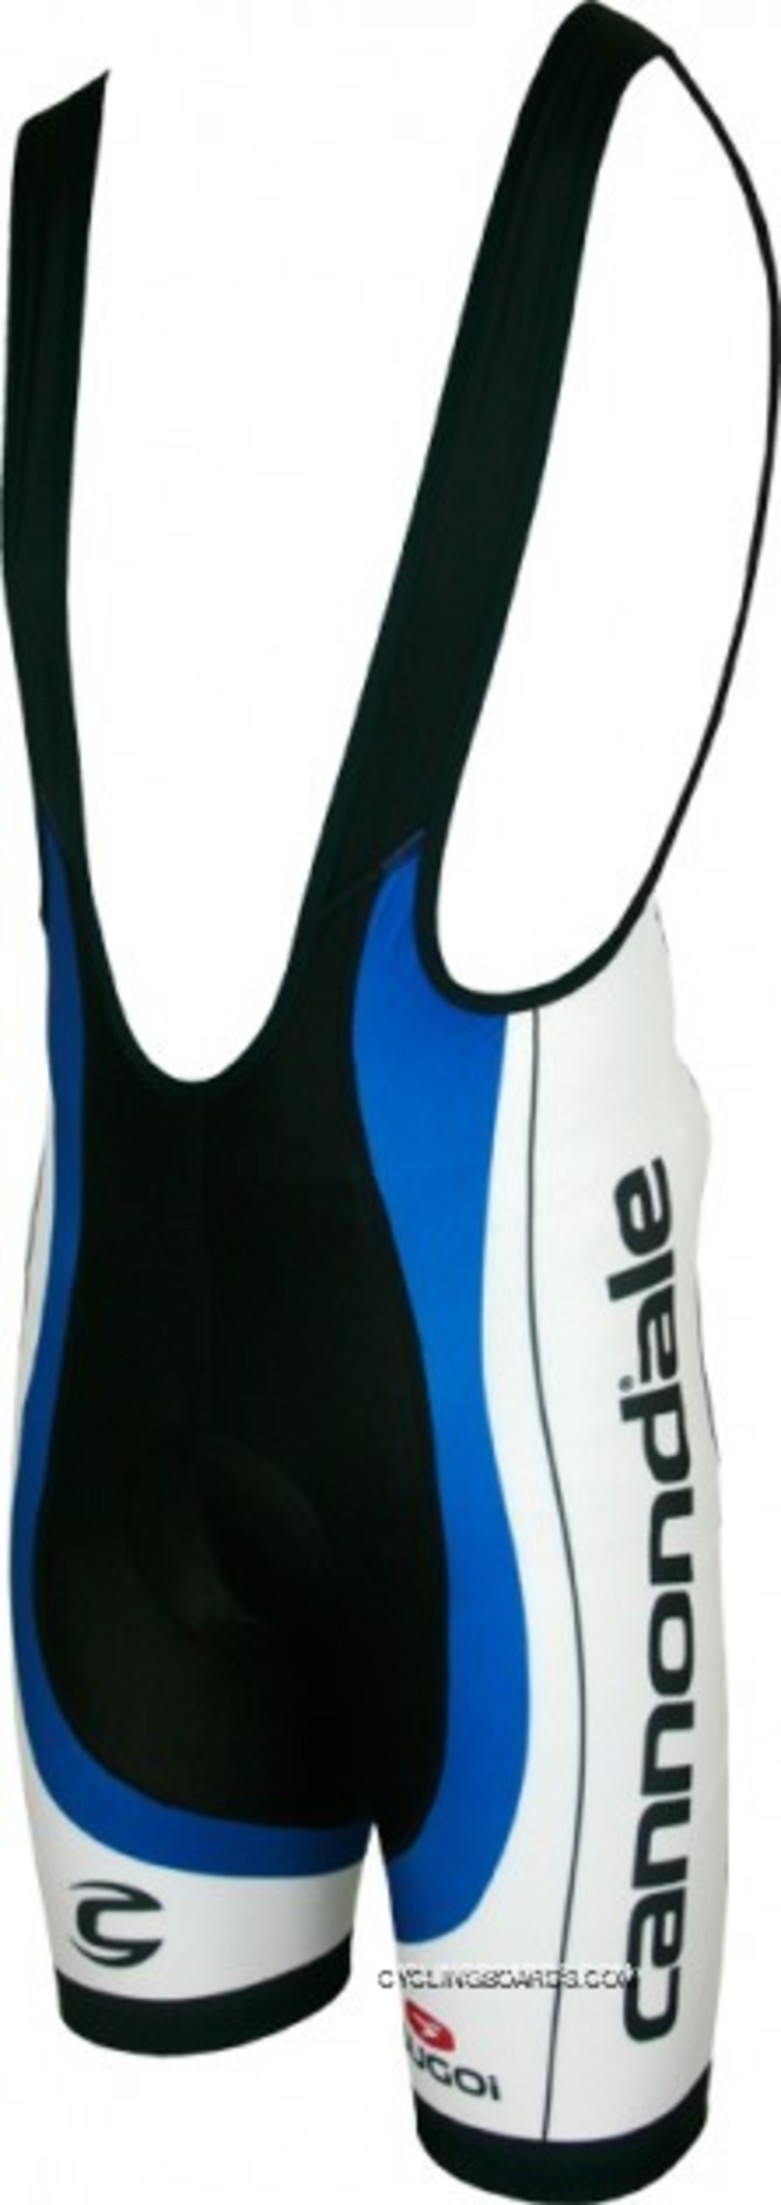 Outlet Cannondale Pro Cycling Black Edition 2013 Sugoi Professional Bib Shorts Tj-682-1435